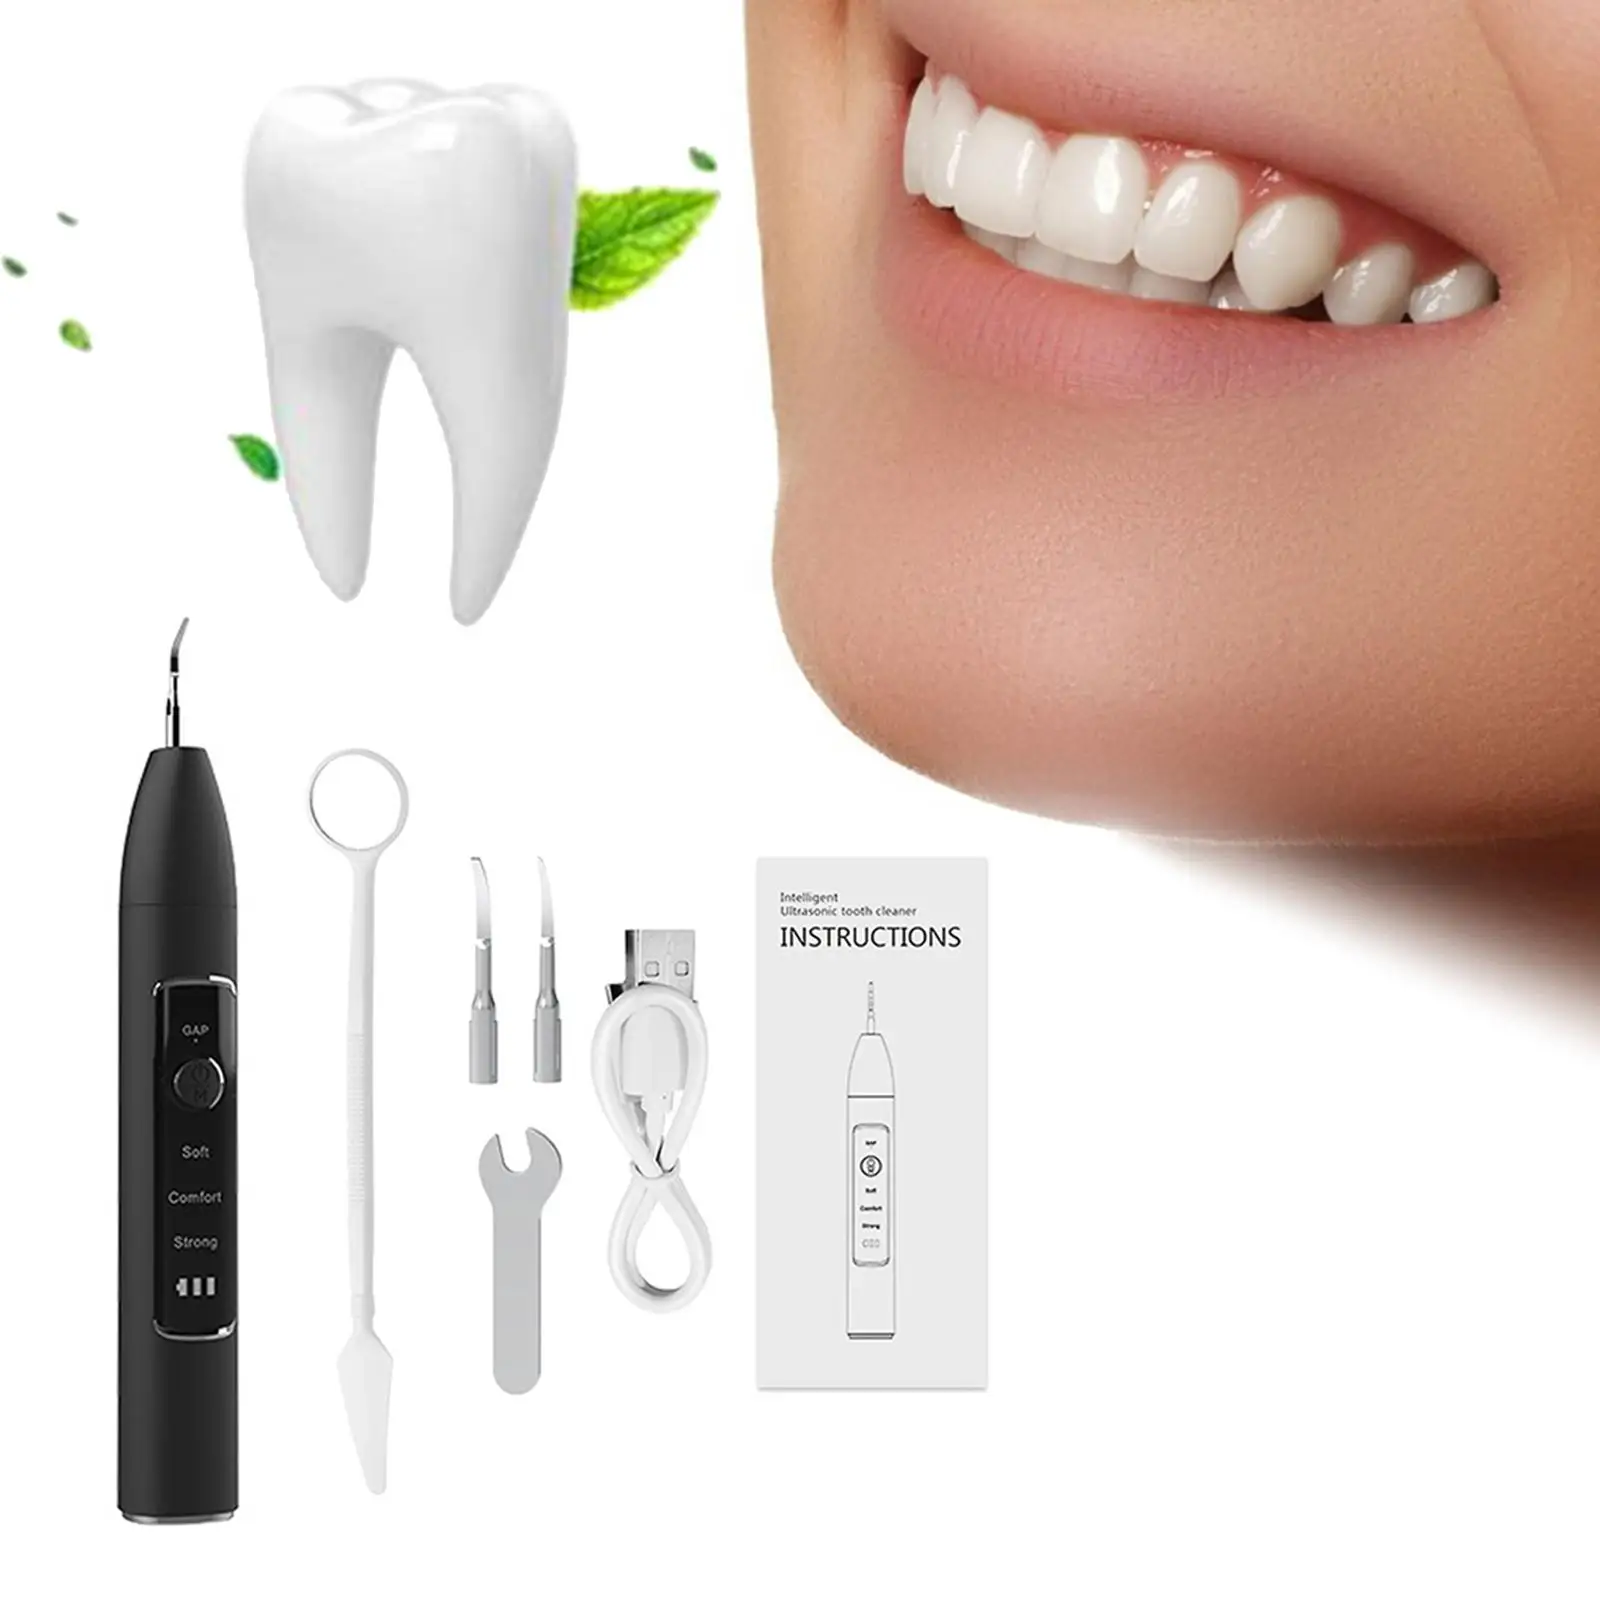 Teeth Cleaner Portable Electric Cleaner Tool Professional with Mouth Mirror 3 Working Modes Tooth Stain Remover for Home Travel